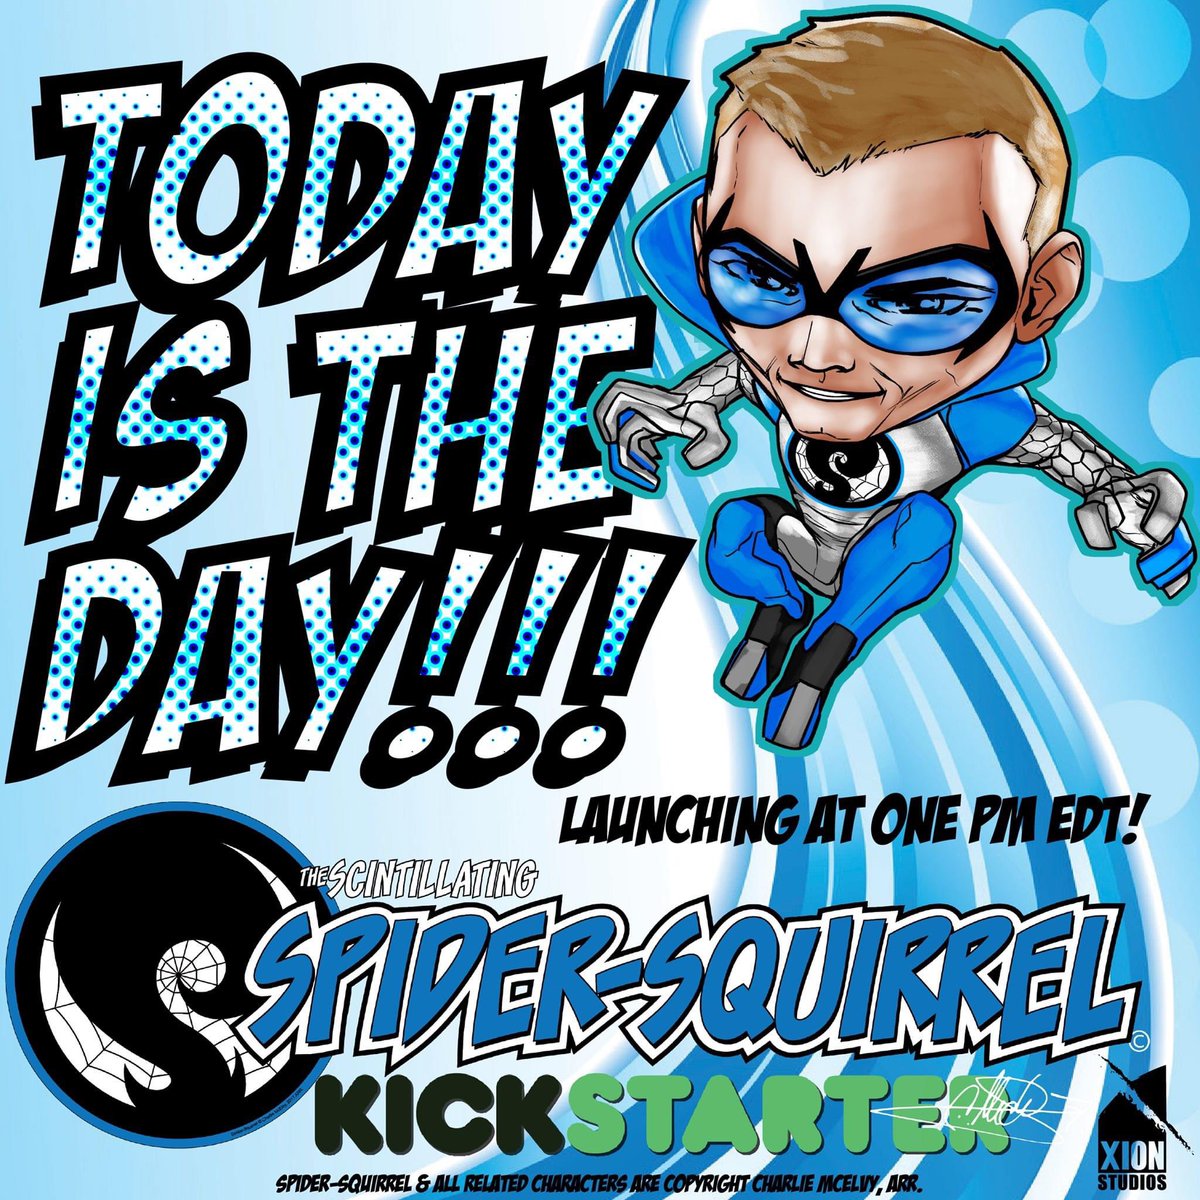 TODAY'S THE DAY!!!

I'll be on ChatAndDraw TODAY at 1pm EDT to launch my campaign!

Twitch.tv/mostepicart

Sign-up to be notified of my Kickstarter launch here:
kickstarter.com/projects/watch…

#supportindiecomics #TeamShortFuse #supportsmallbusiness #makecomics #comicbooks